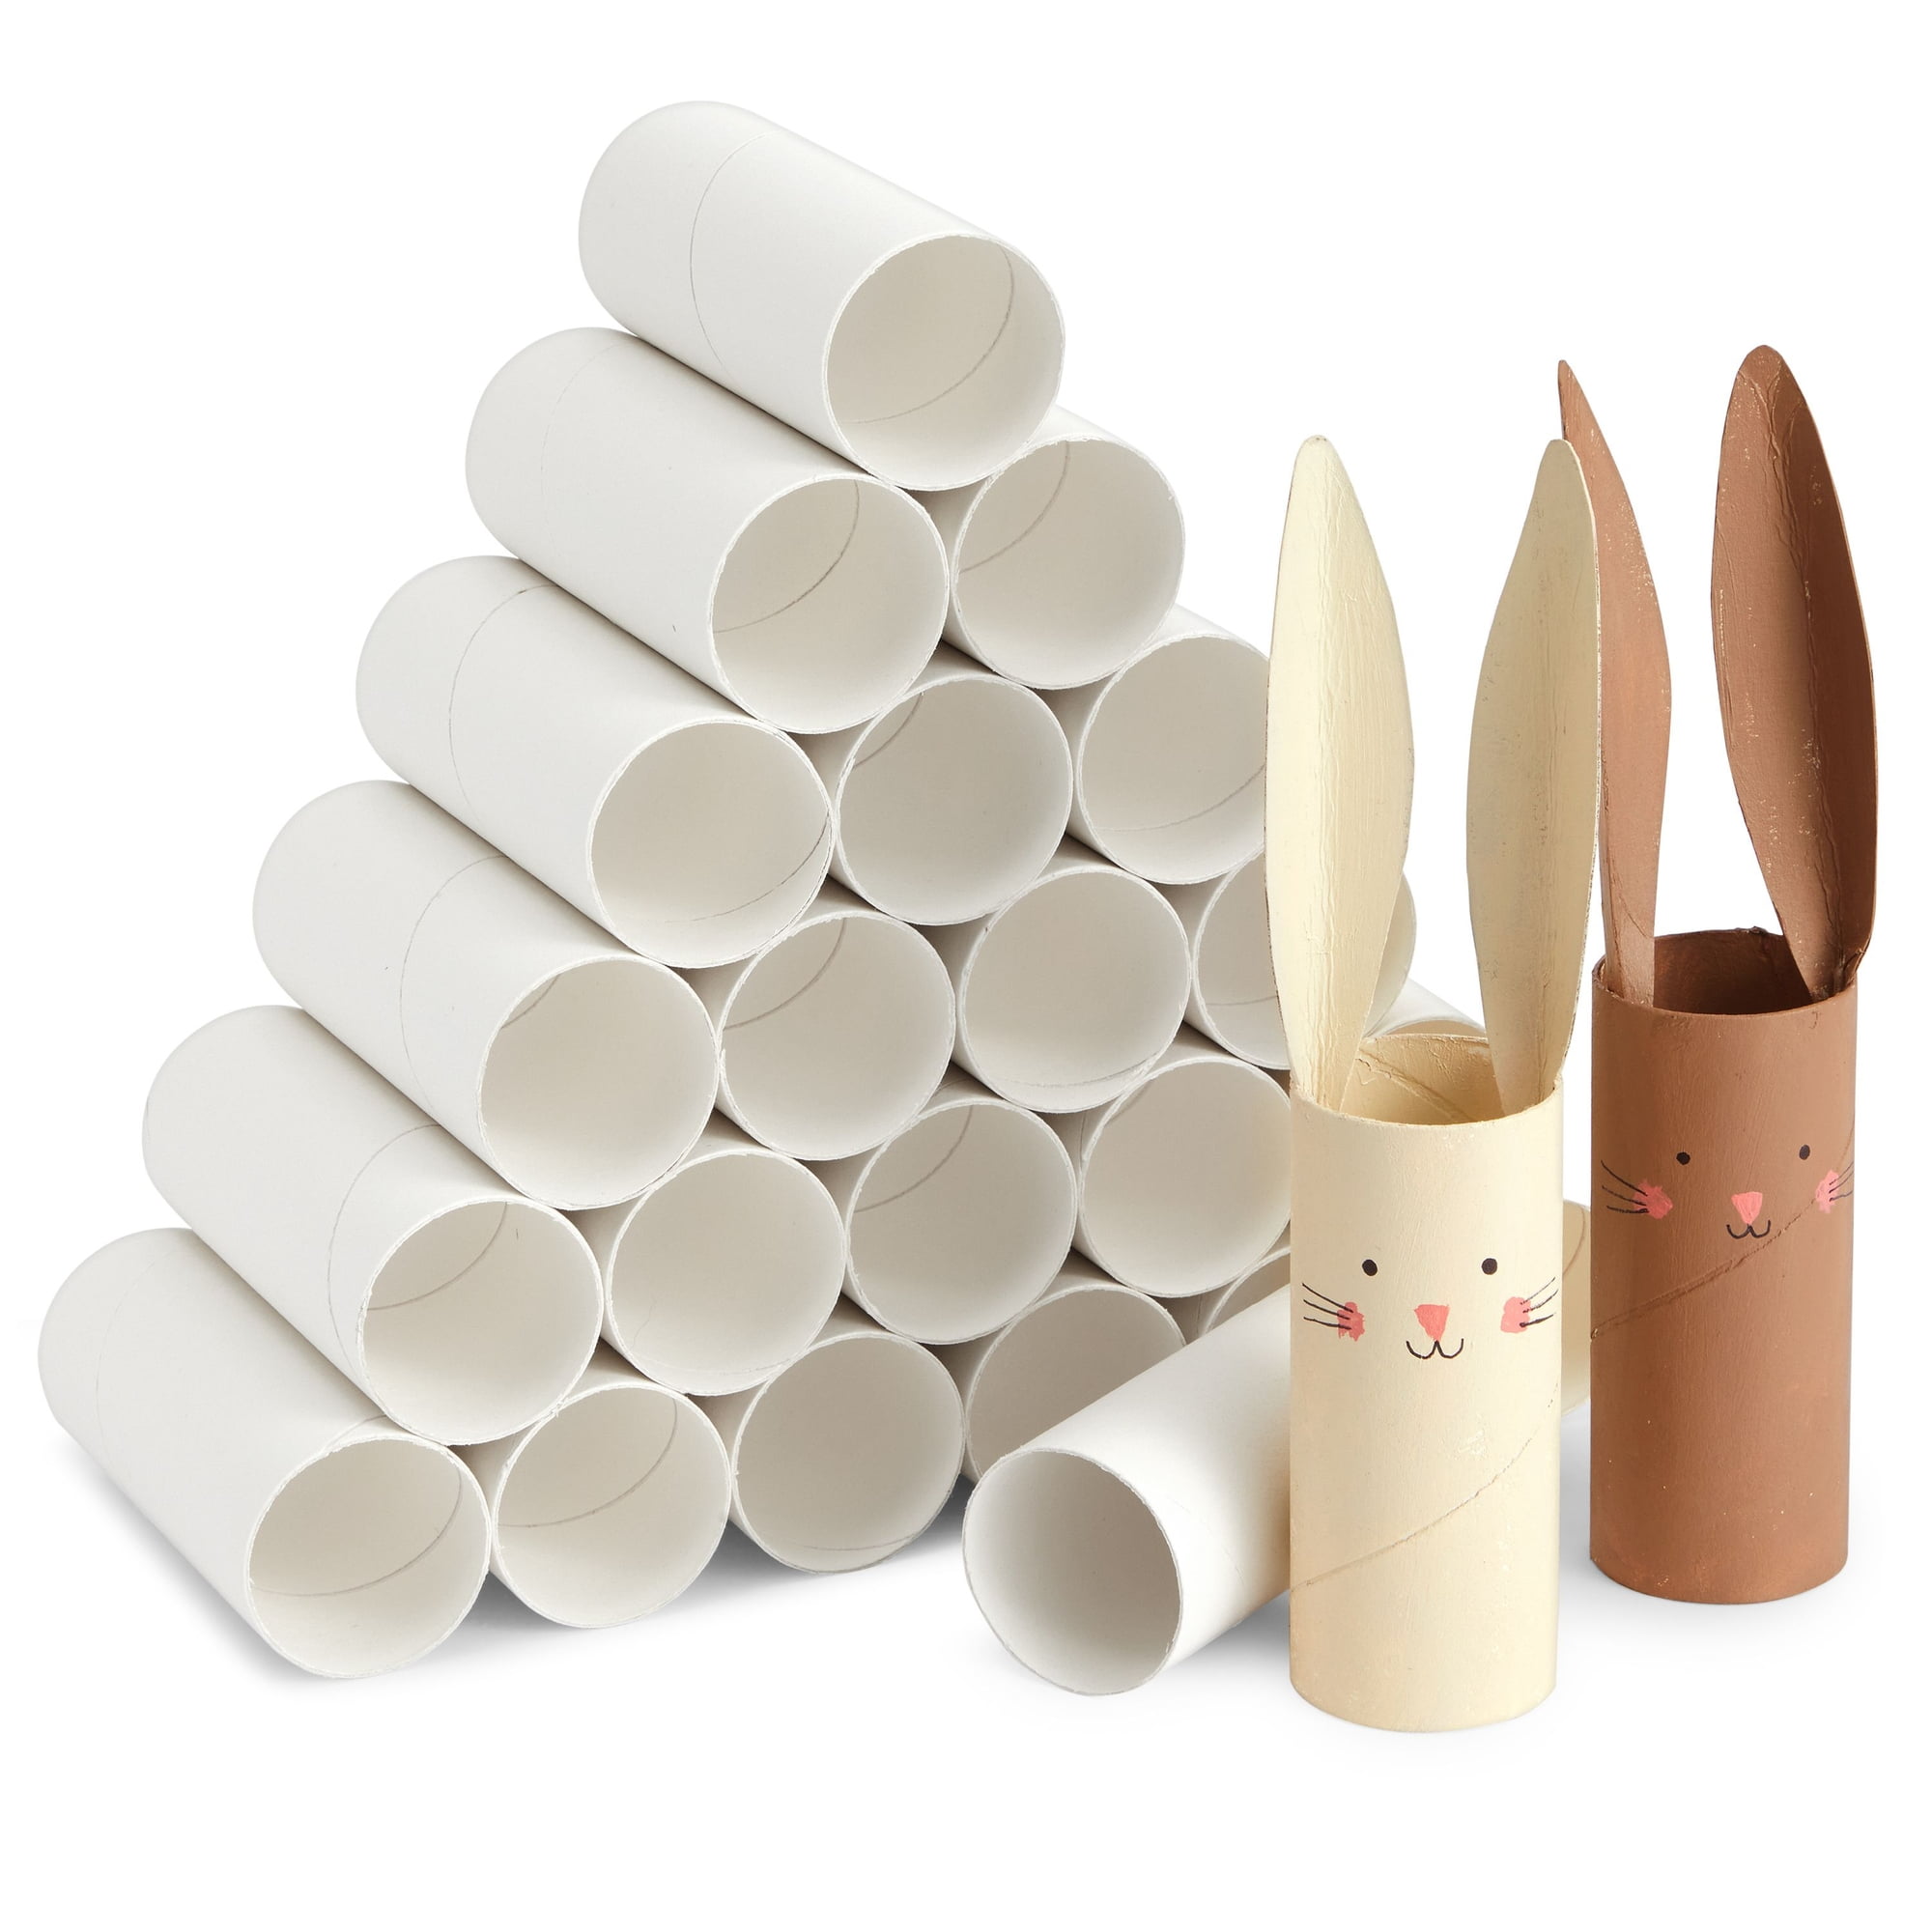 Genie Crafts 48 Pack Cardboard Tubes, Empty White Toilet Paper Rolls for  Crafts, Classroom, DIY Projects (1.6 x 4 In)